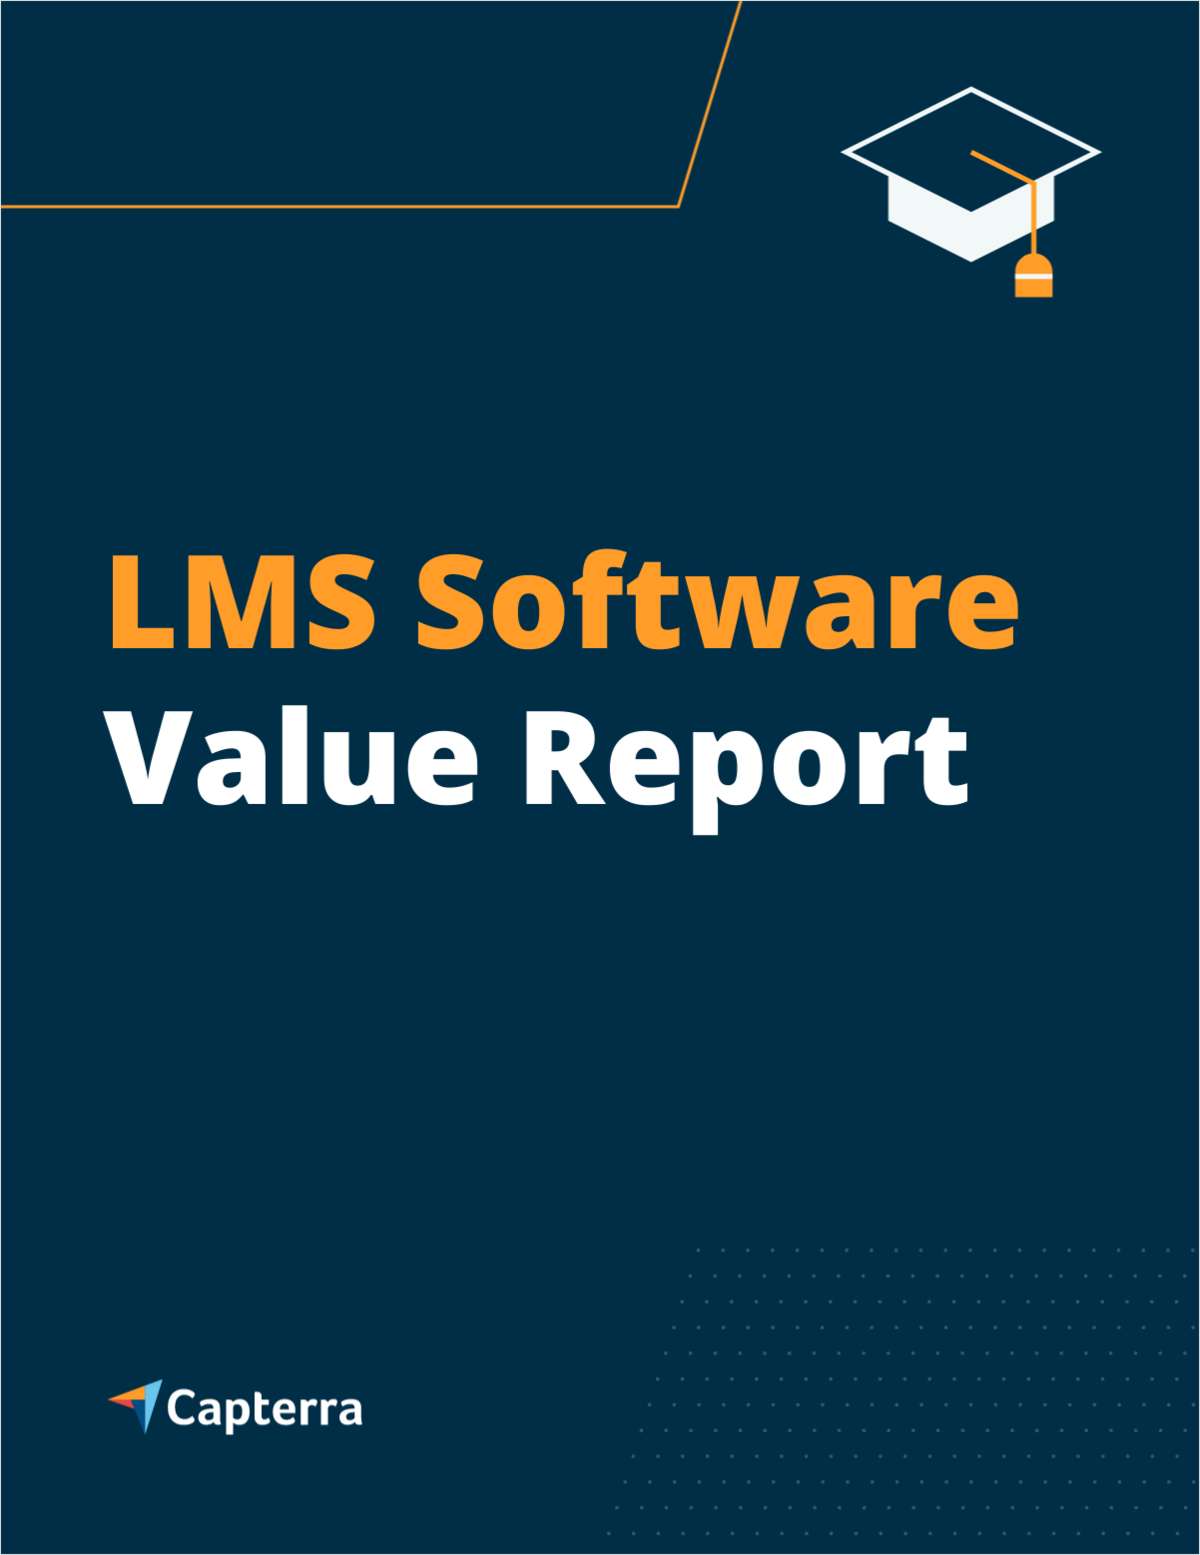 A Price Comparison Guide for LMS Software